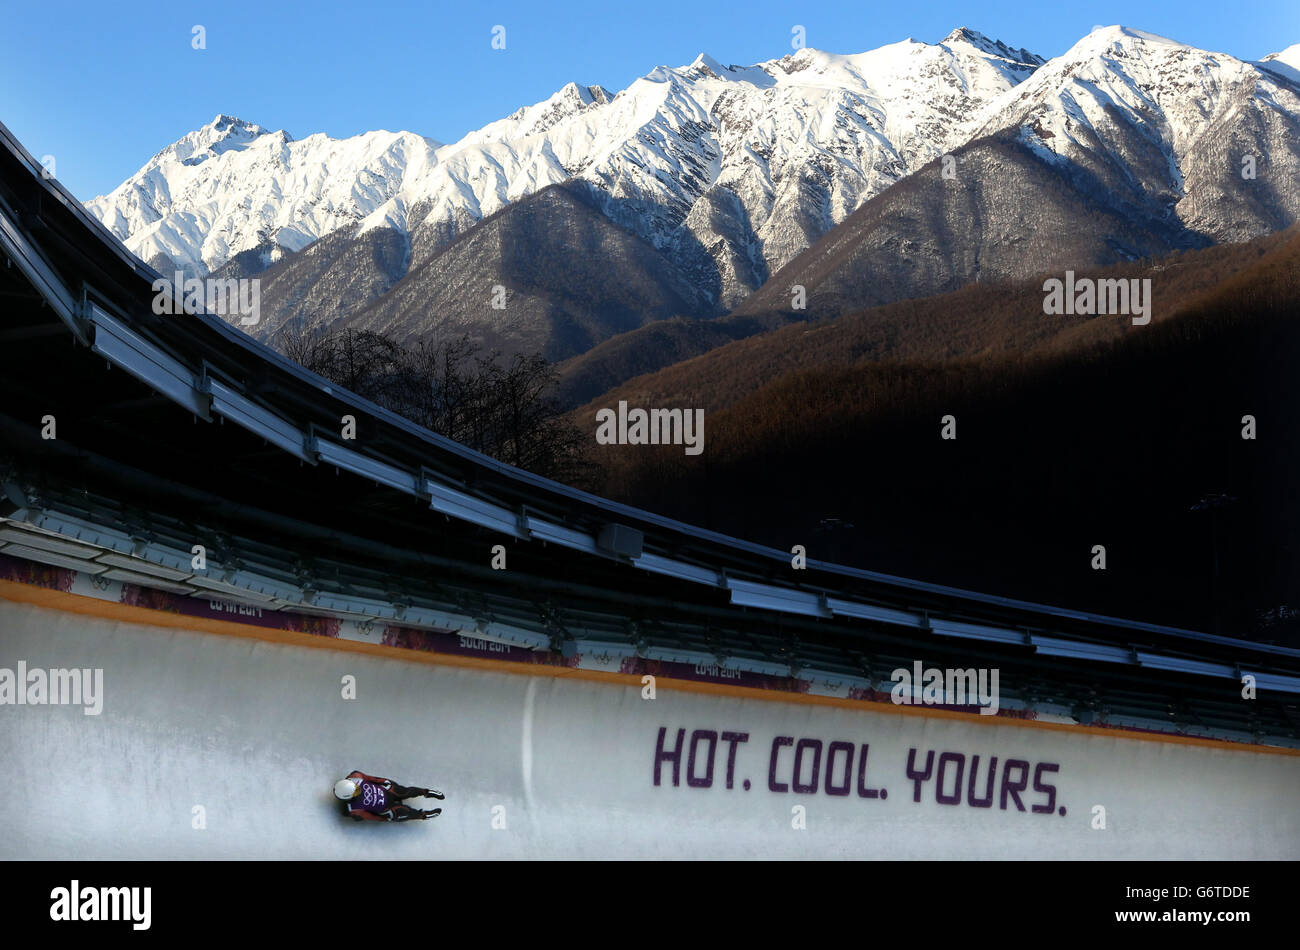 Sochi Winter Olympic Games - Pre-Games activity - Thursday Stock Photo